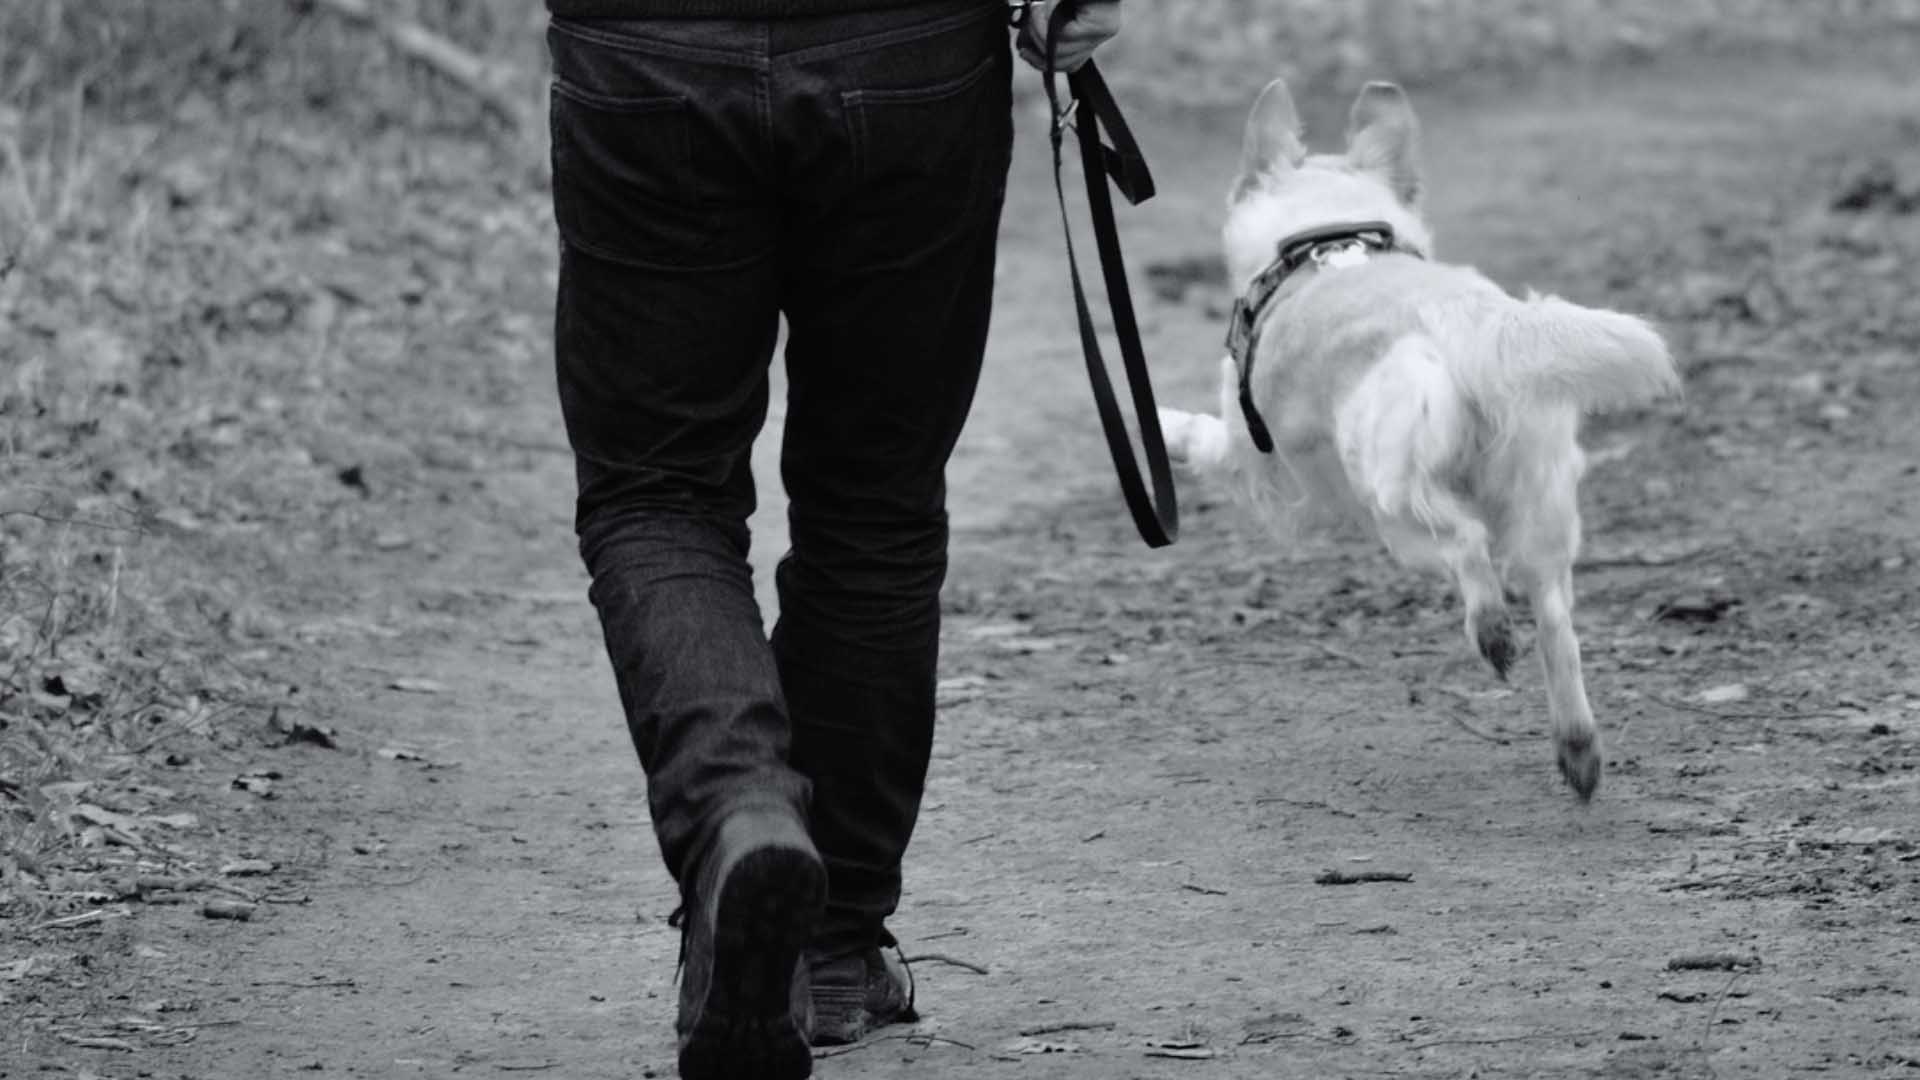 Personal dog walking services in Thirsk